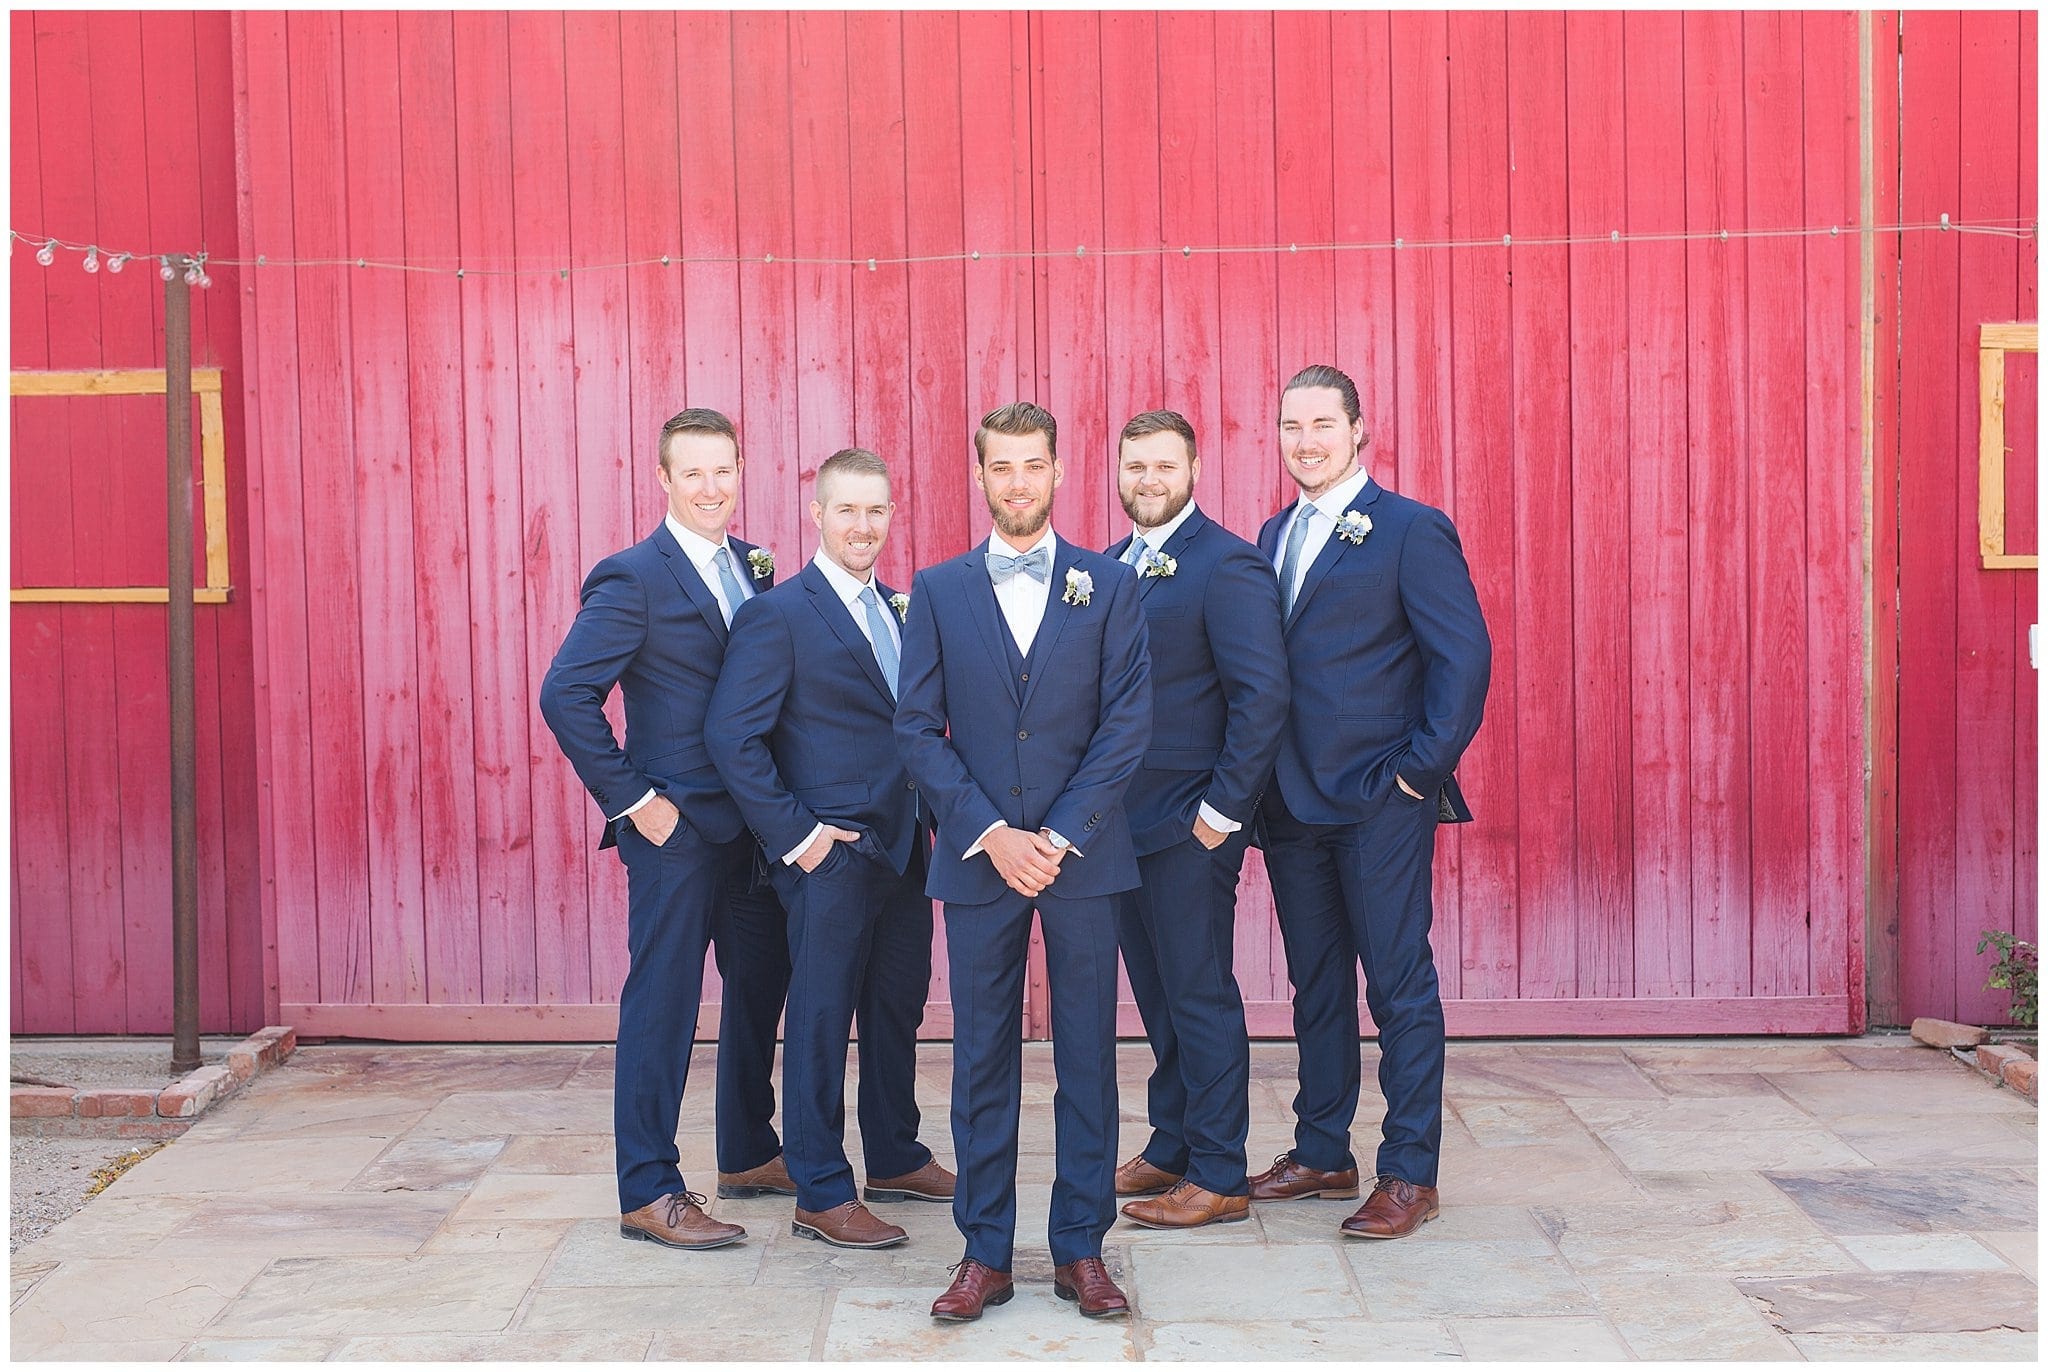 Windmill Winery Groomsmen Pictures